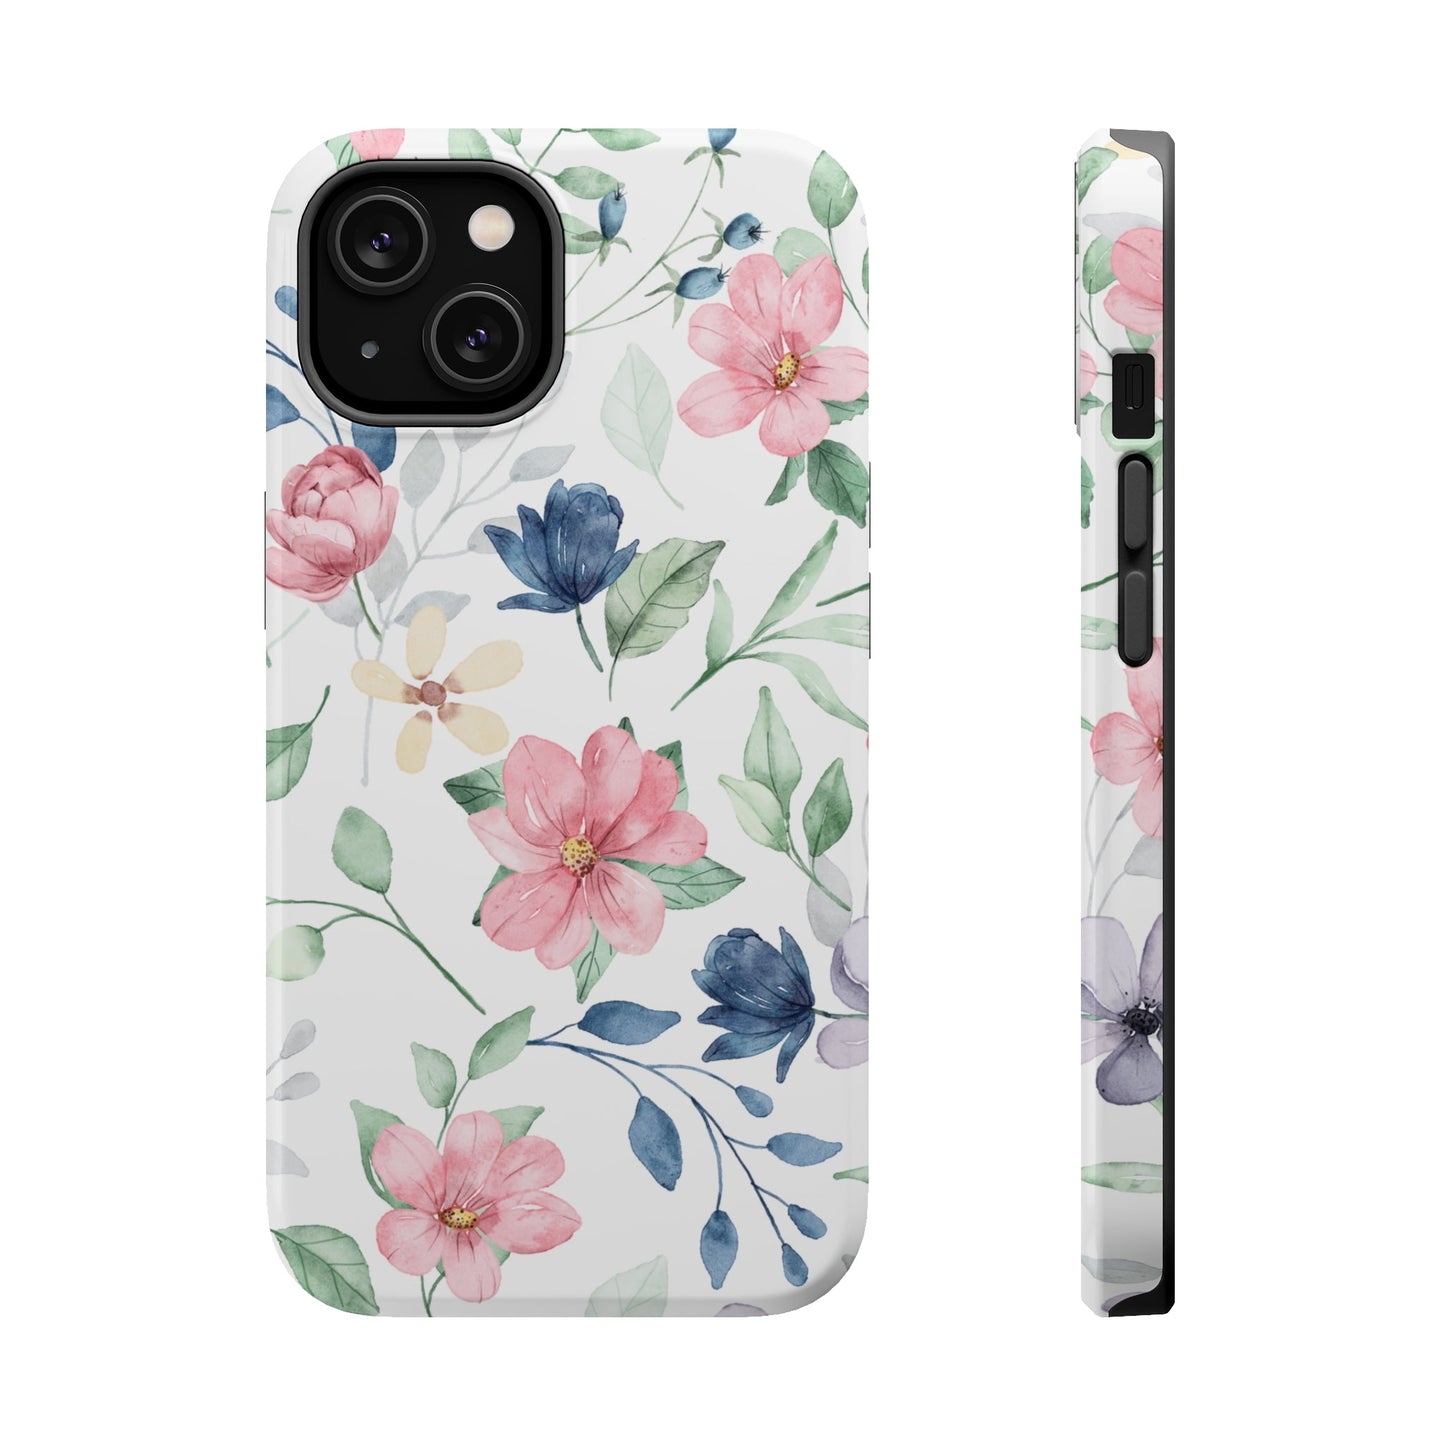 MagSafe iPhone Case - Floral Pastels - Cheerful Lane